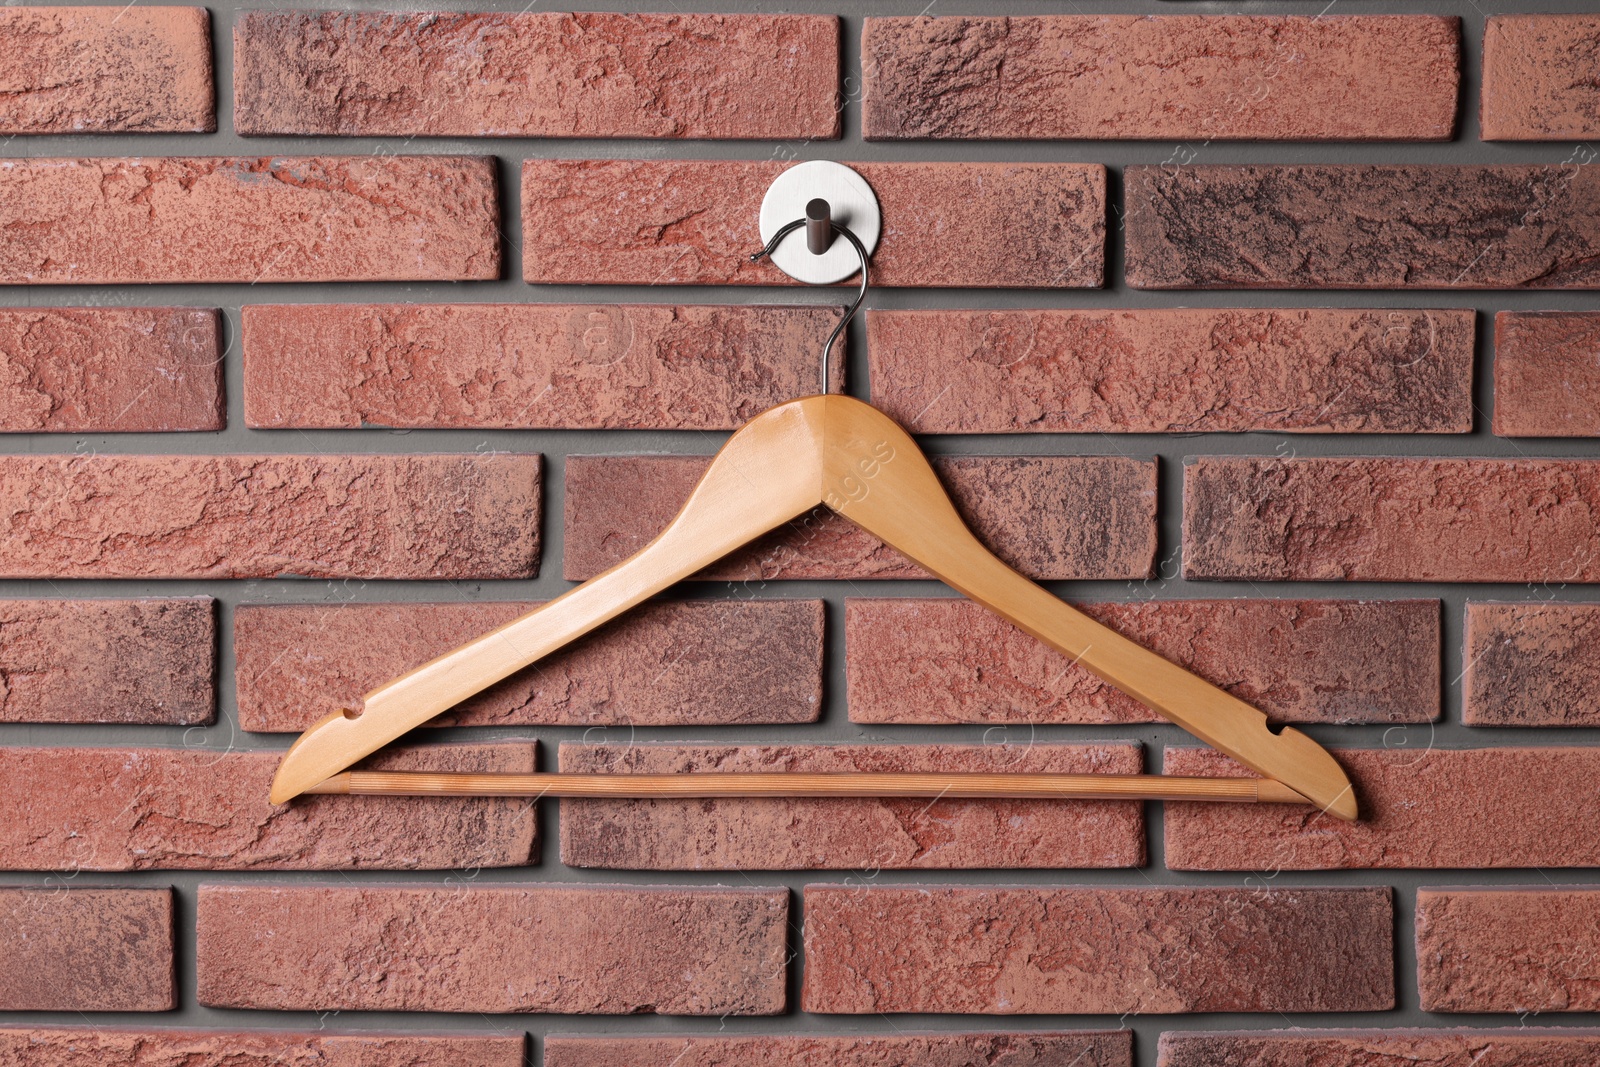 Photo of Wooden clothes hanger on red brick wall